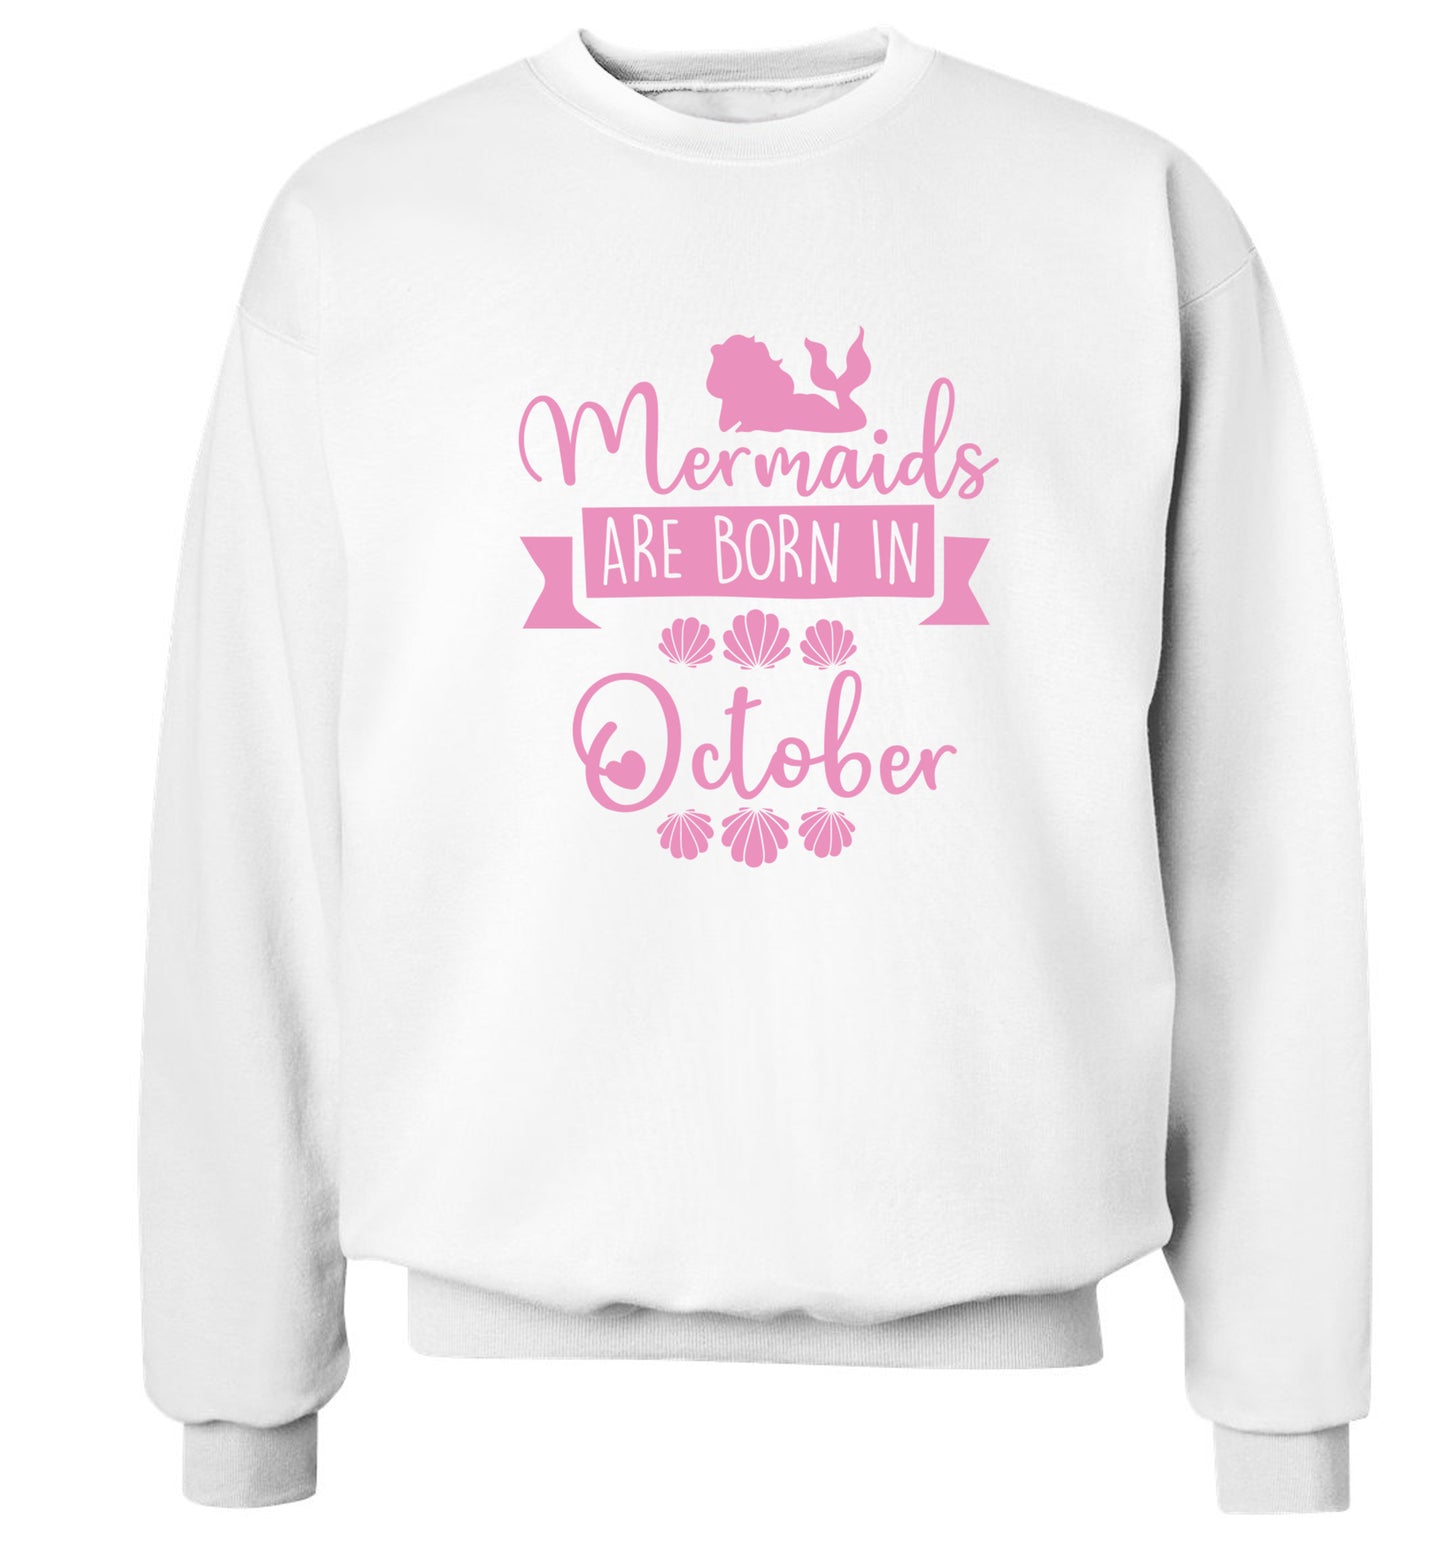 Mermaids are born in October Adult's unisex white Sweater 2XL